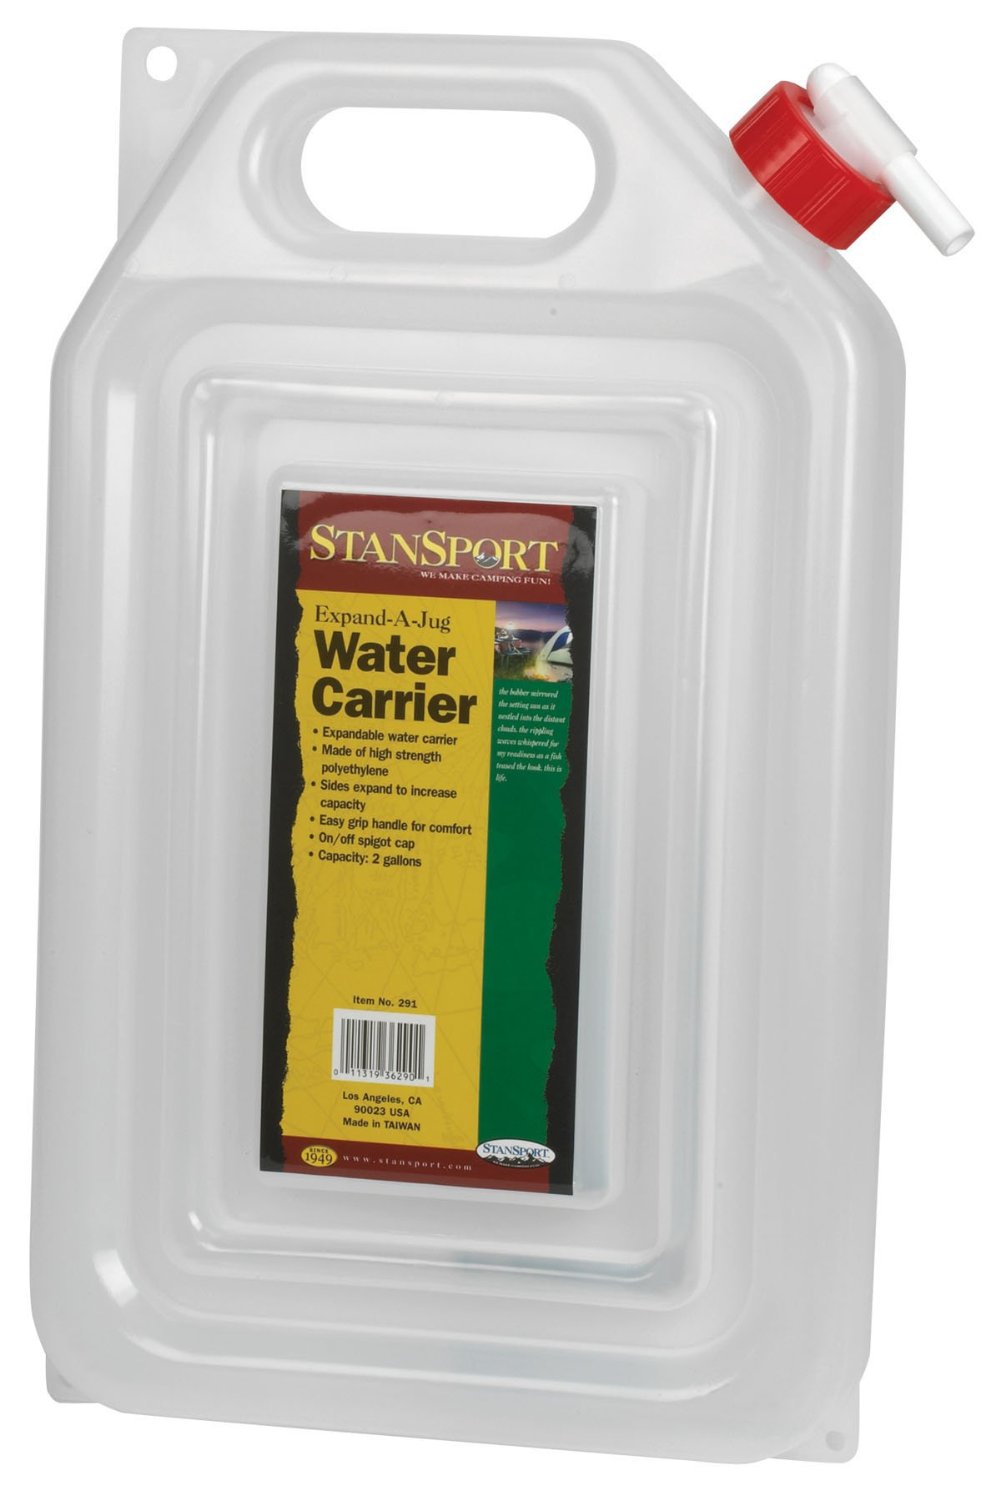 Stansport Outdoor 291 2-Gallon Expand-A-Jug Water Carrier